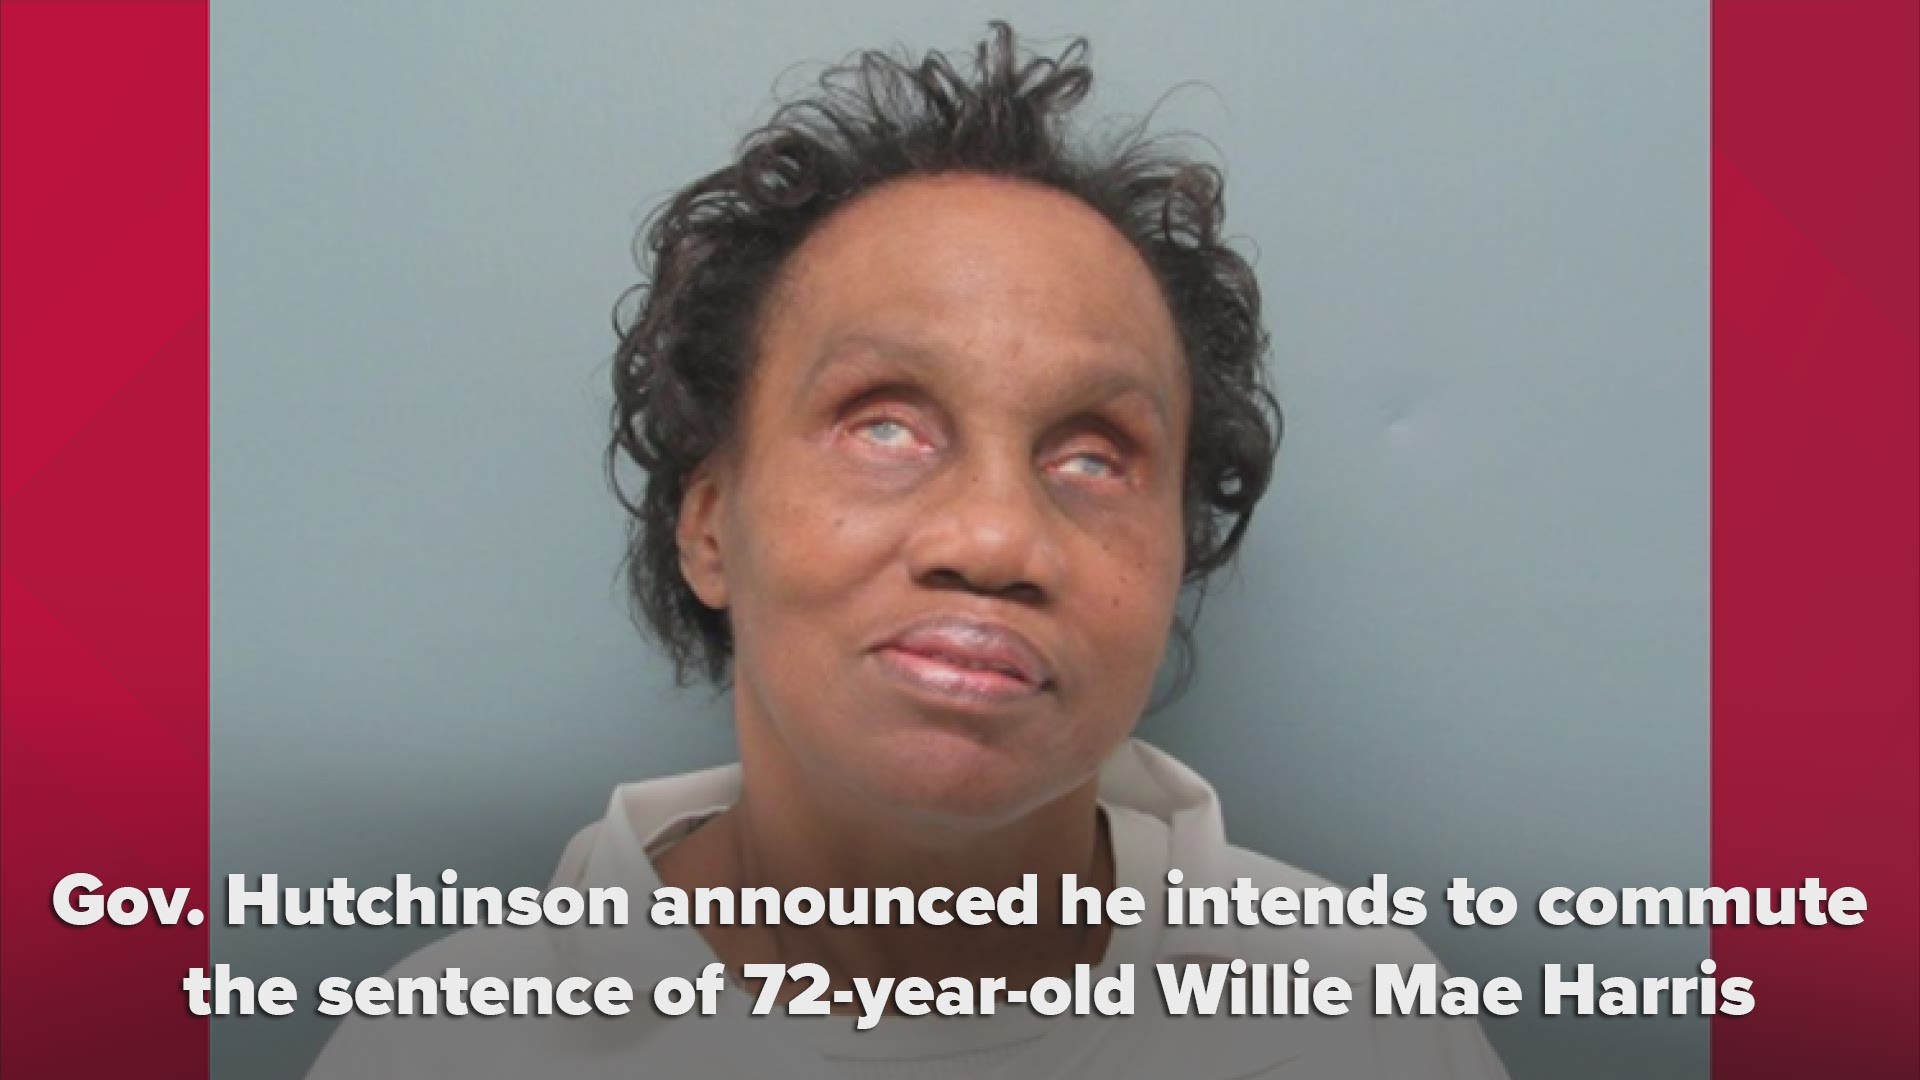 Governor Asa Hutchinson announced Wednesday that he intends to commute the sentence of Willie Mae Harris, who was convicted for the murder of her husband in 1985.